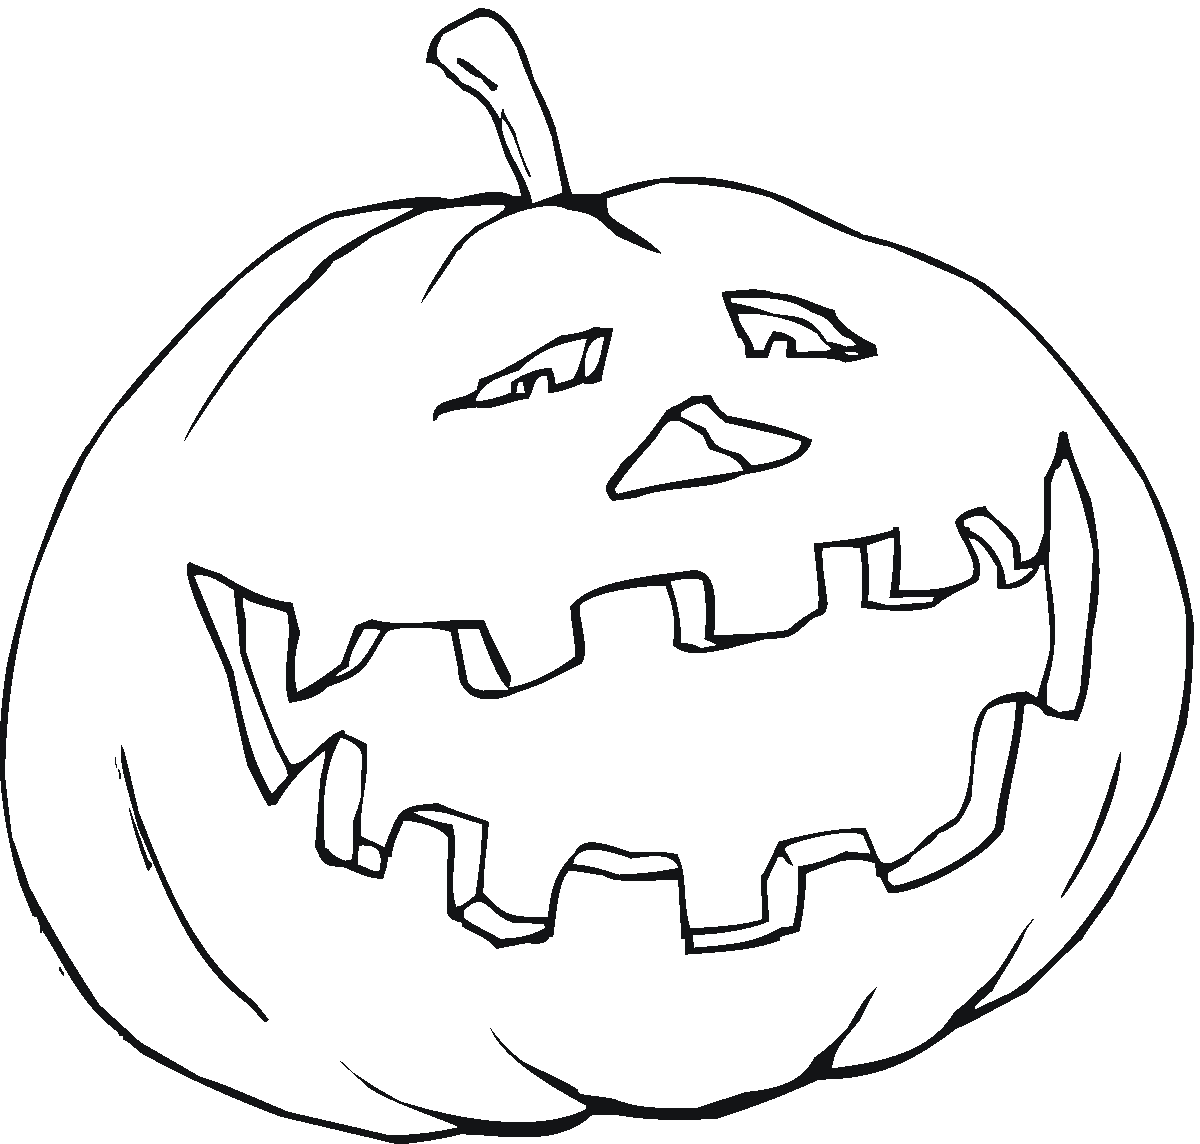 Pumpkin Outline Printable | Clipart library - Free Clipart Images